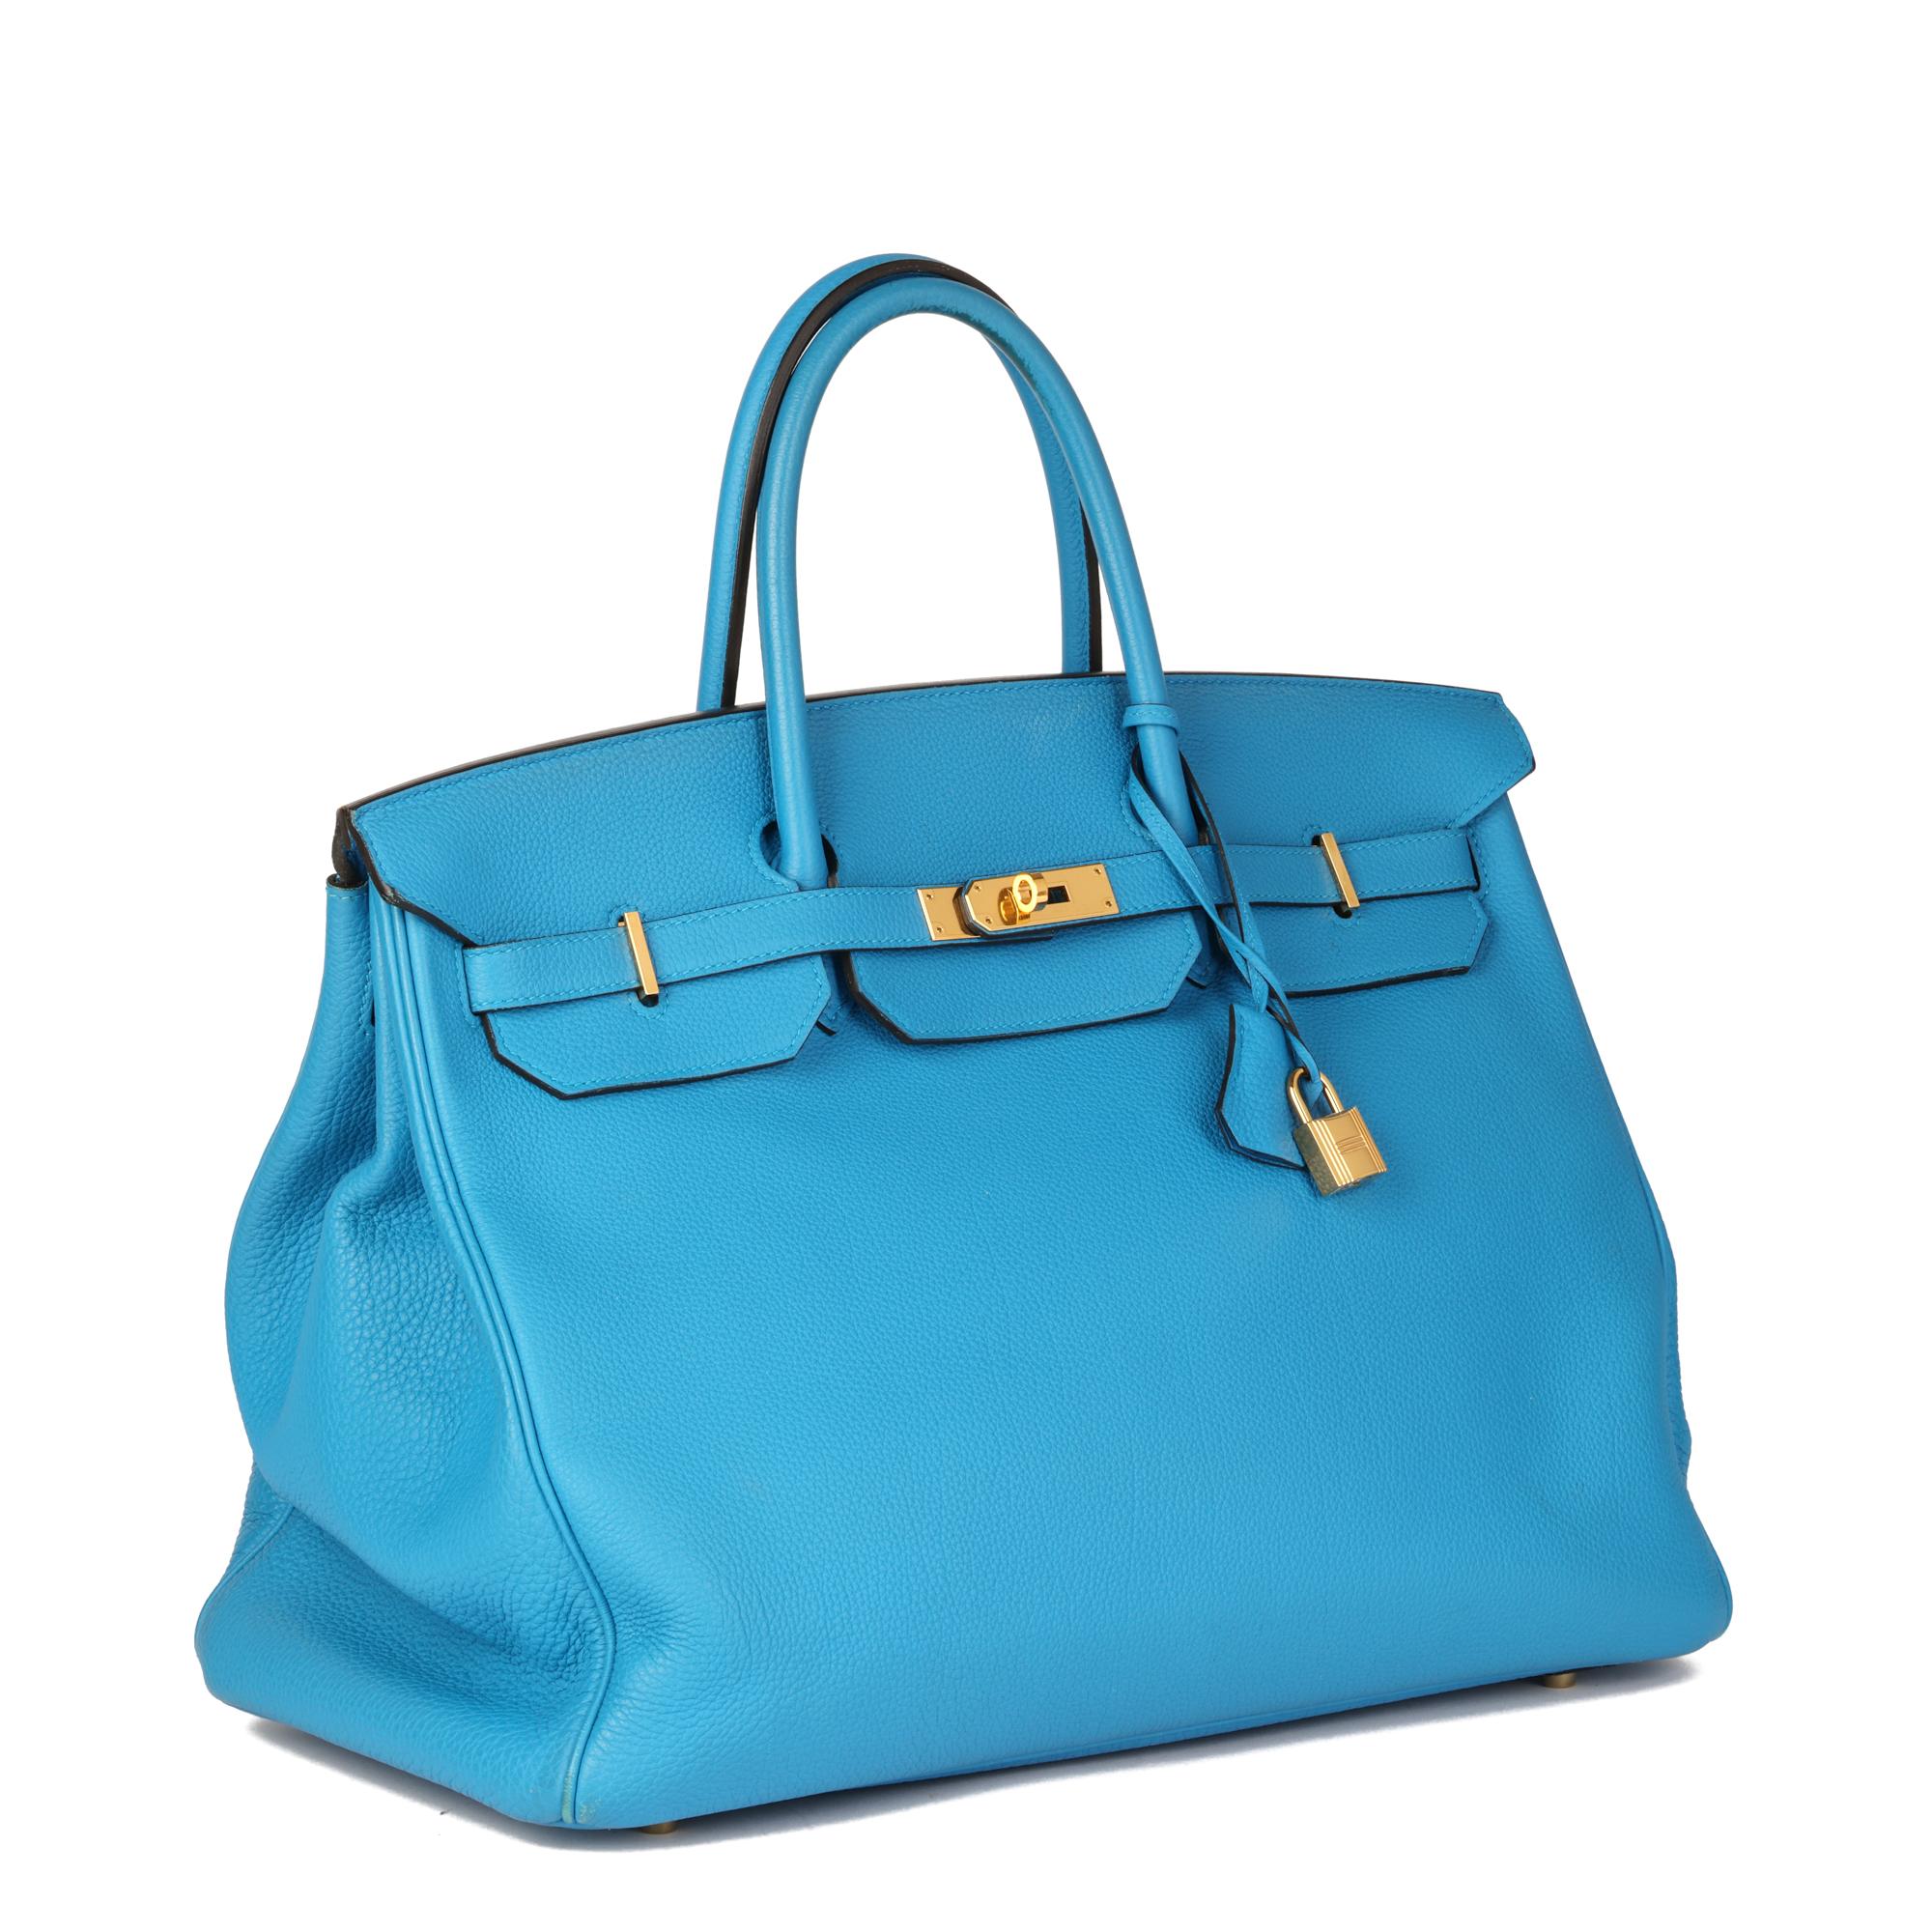 Hermès Blue Zanzibar Togo Leather Birkin 40cm


CONDITION NOTES
The exterior is in very good condition with light signs of use throughout. The bag appears slouchy when empty.
The interior is in excellent condition with minimal signs of use.
The